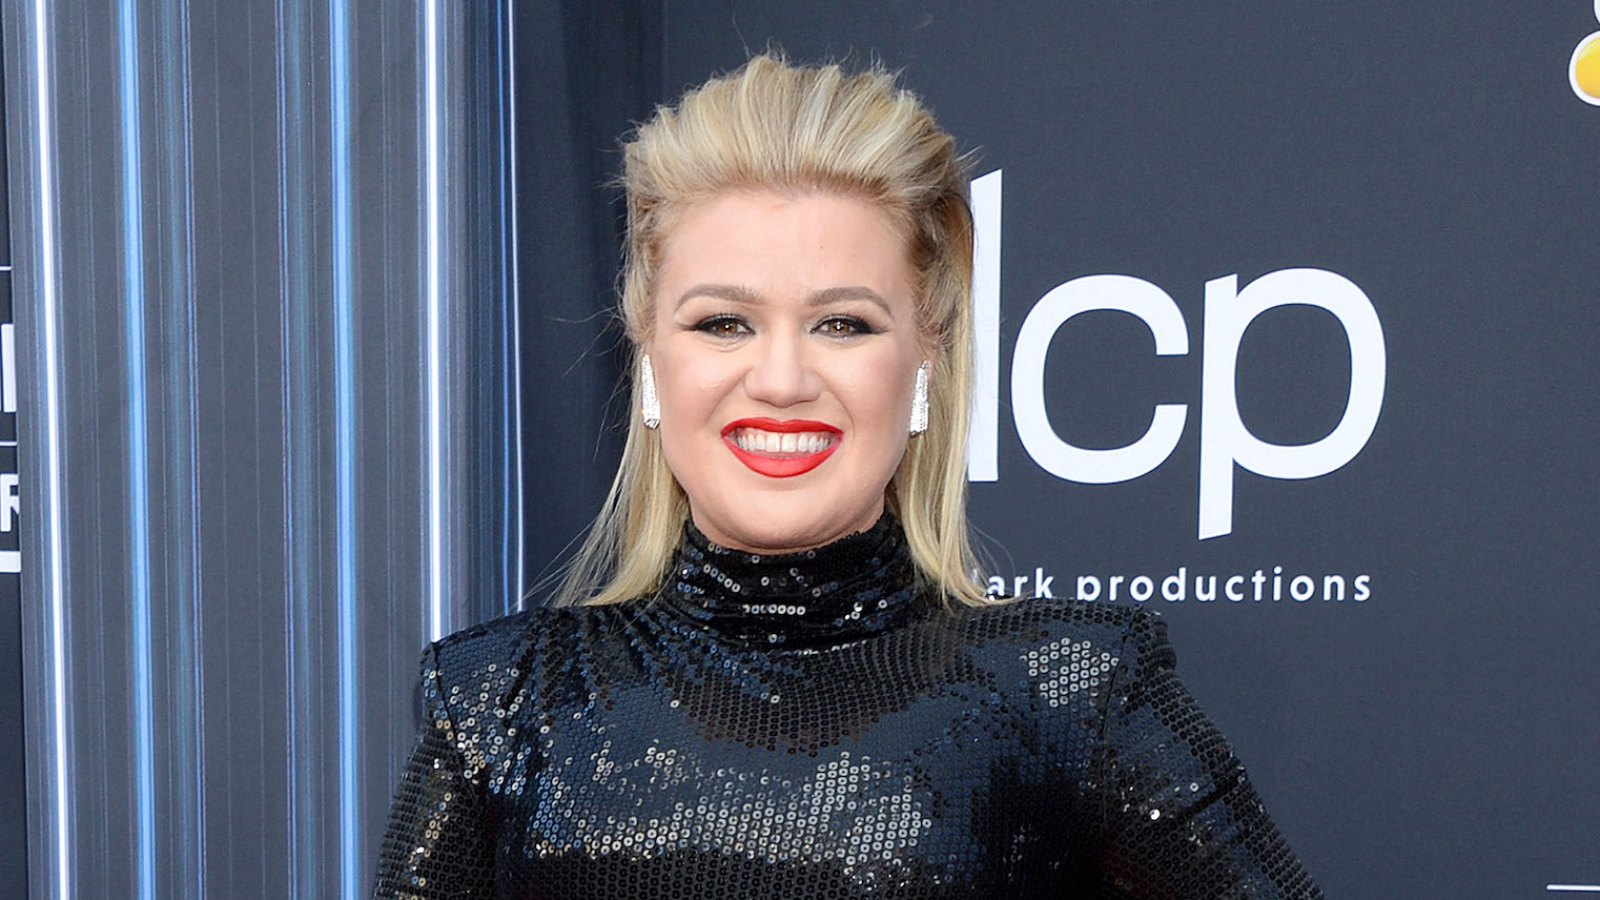 Kelly Clarkson reveals she cut too truth telling songs from upcoming album